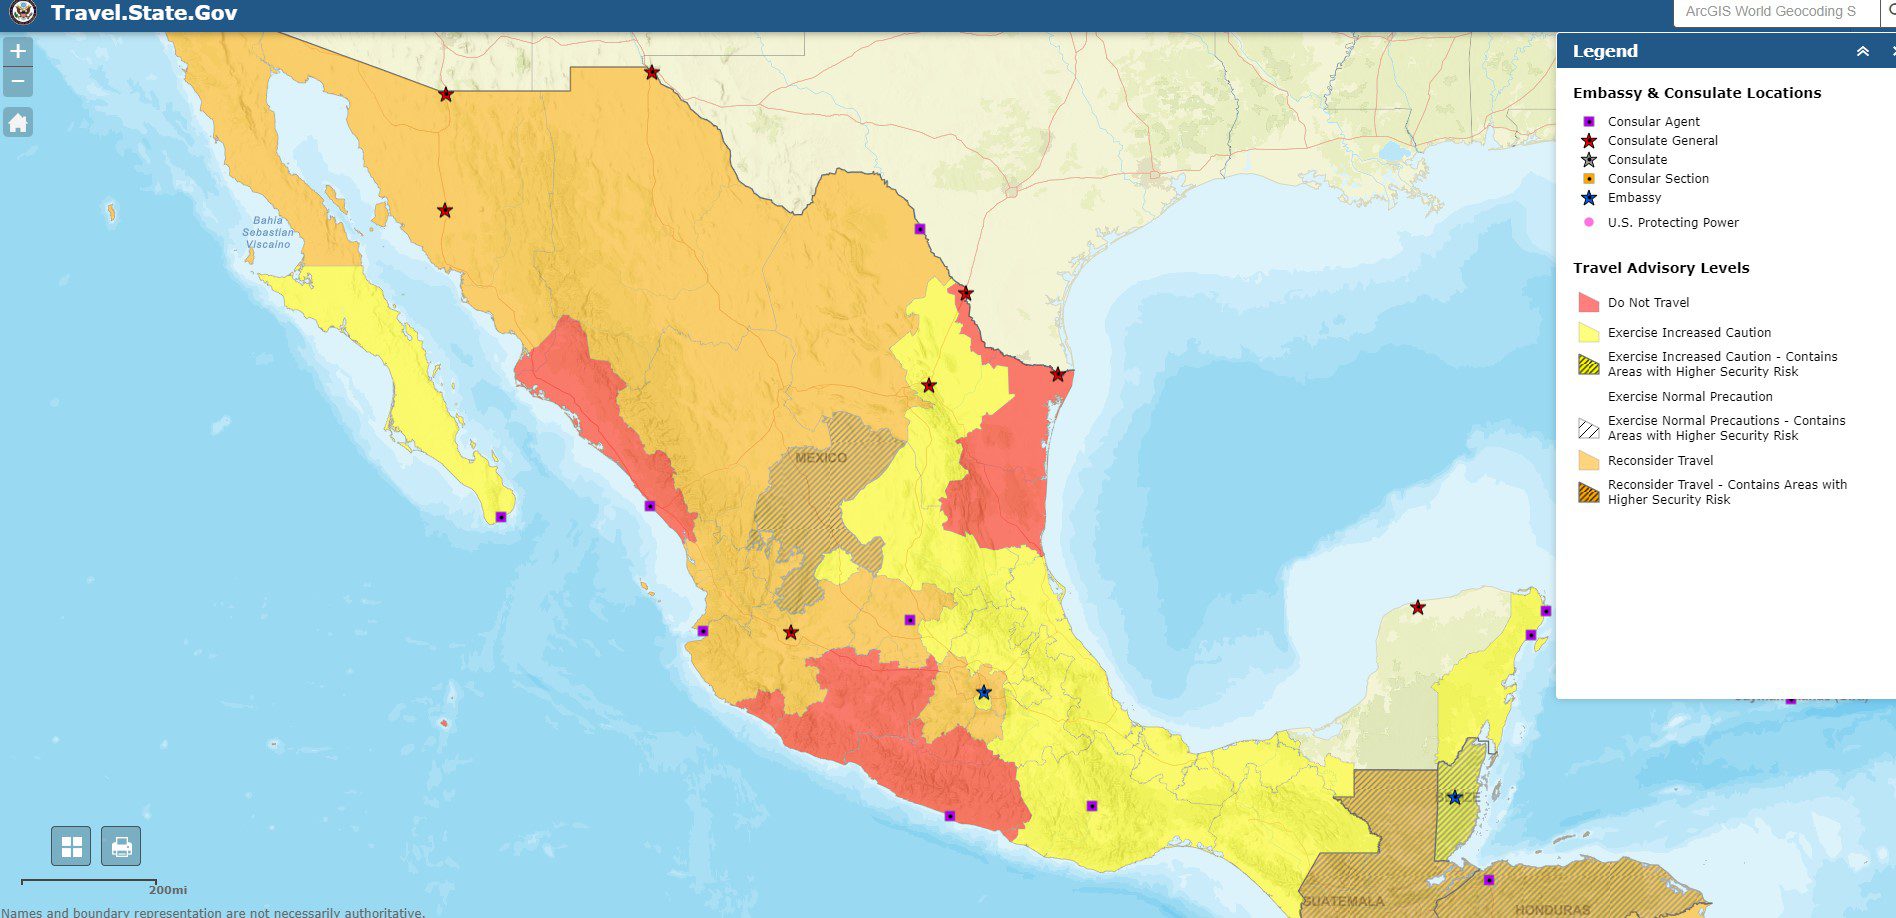 Mexico States Safety Which States & Regions are Safe to Visit?